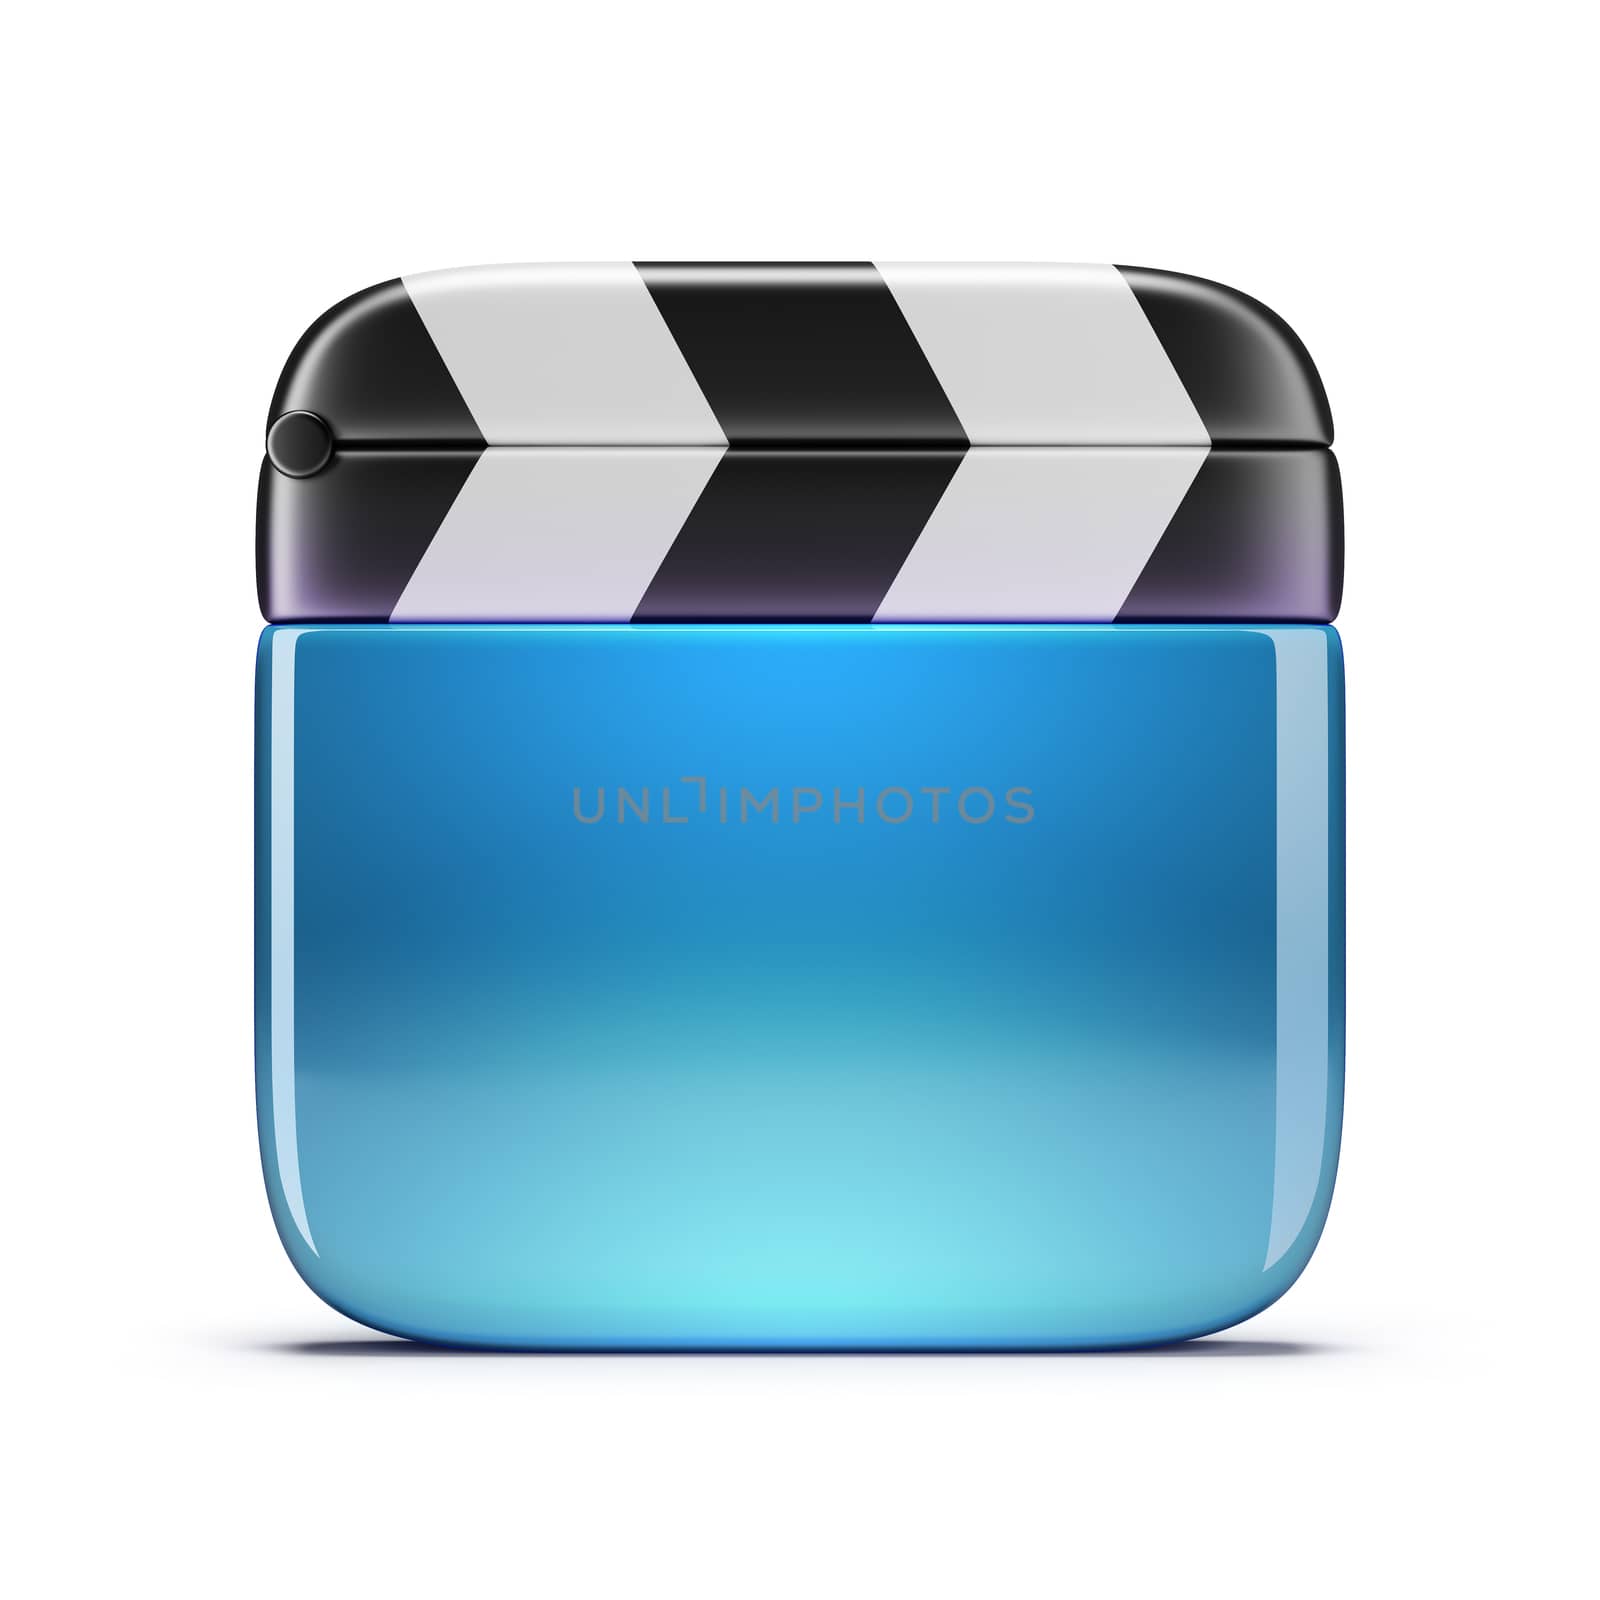 Glass cinema clapper. 3d image. Isolated white background.